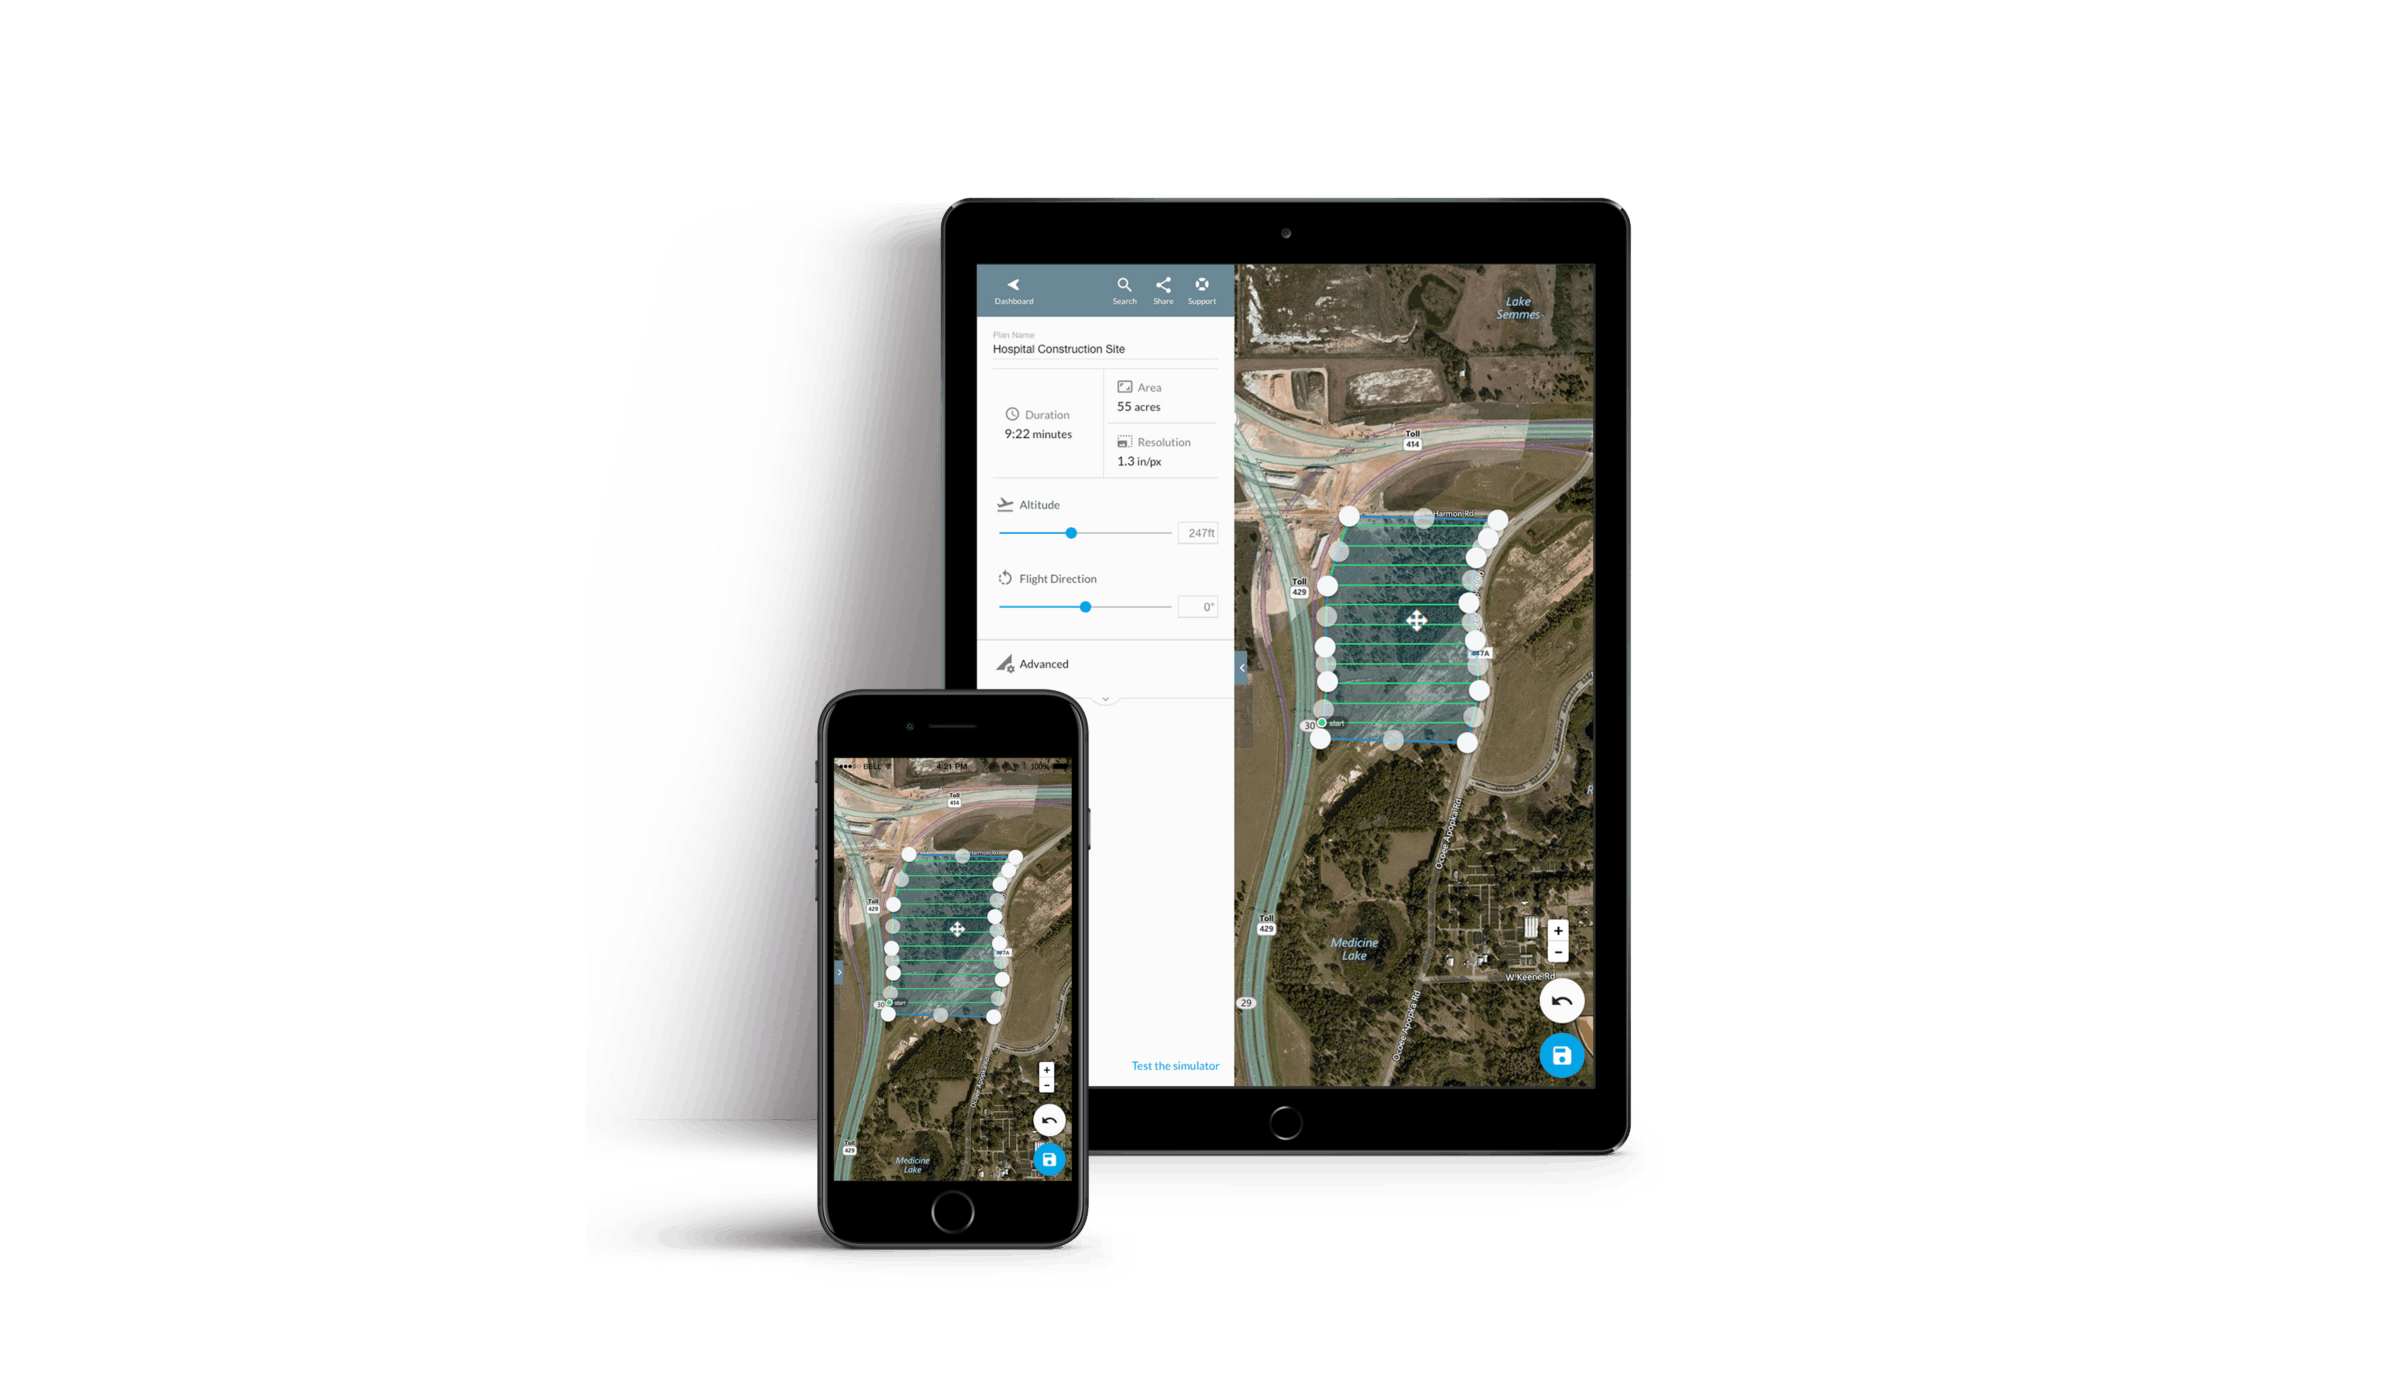 Update to the latest version of the DroneDeploy mobile flight app